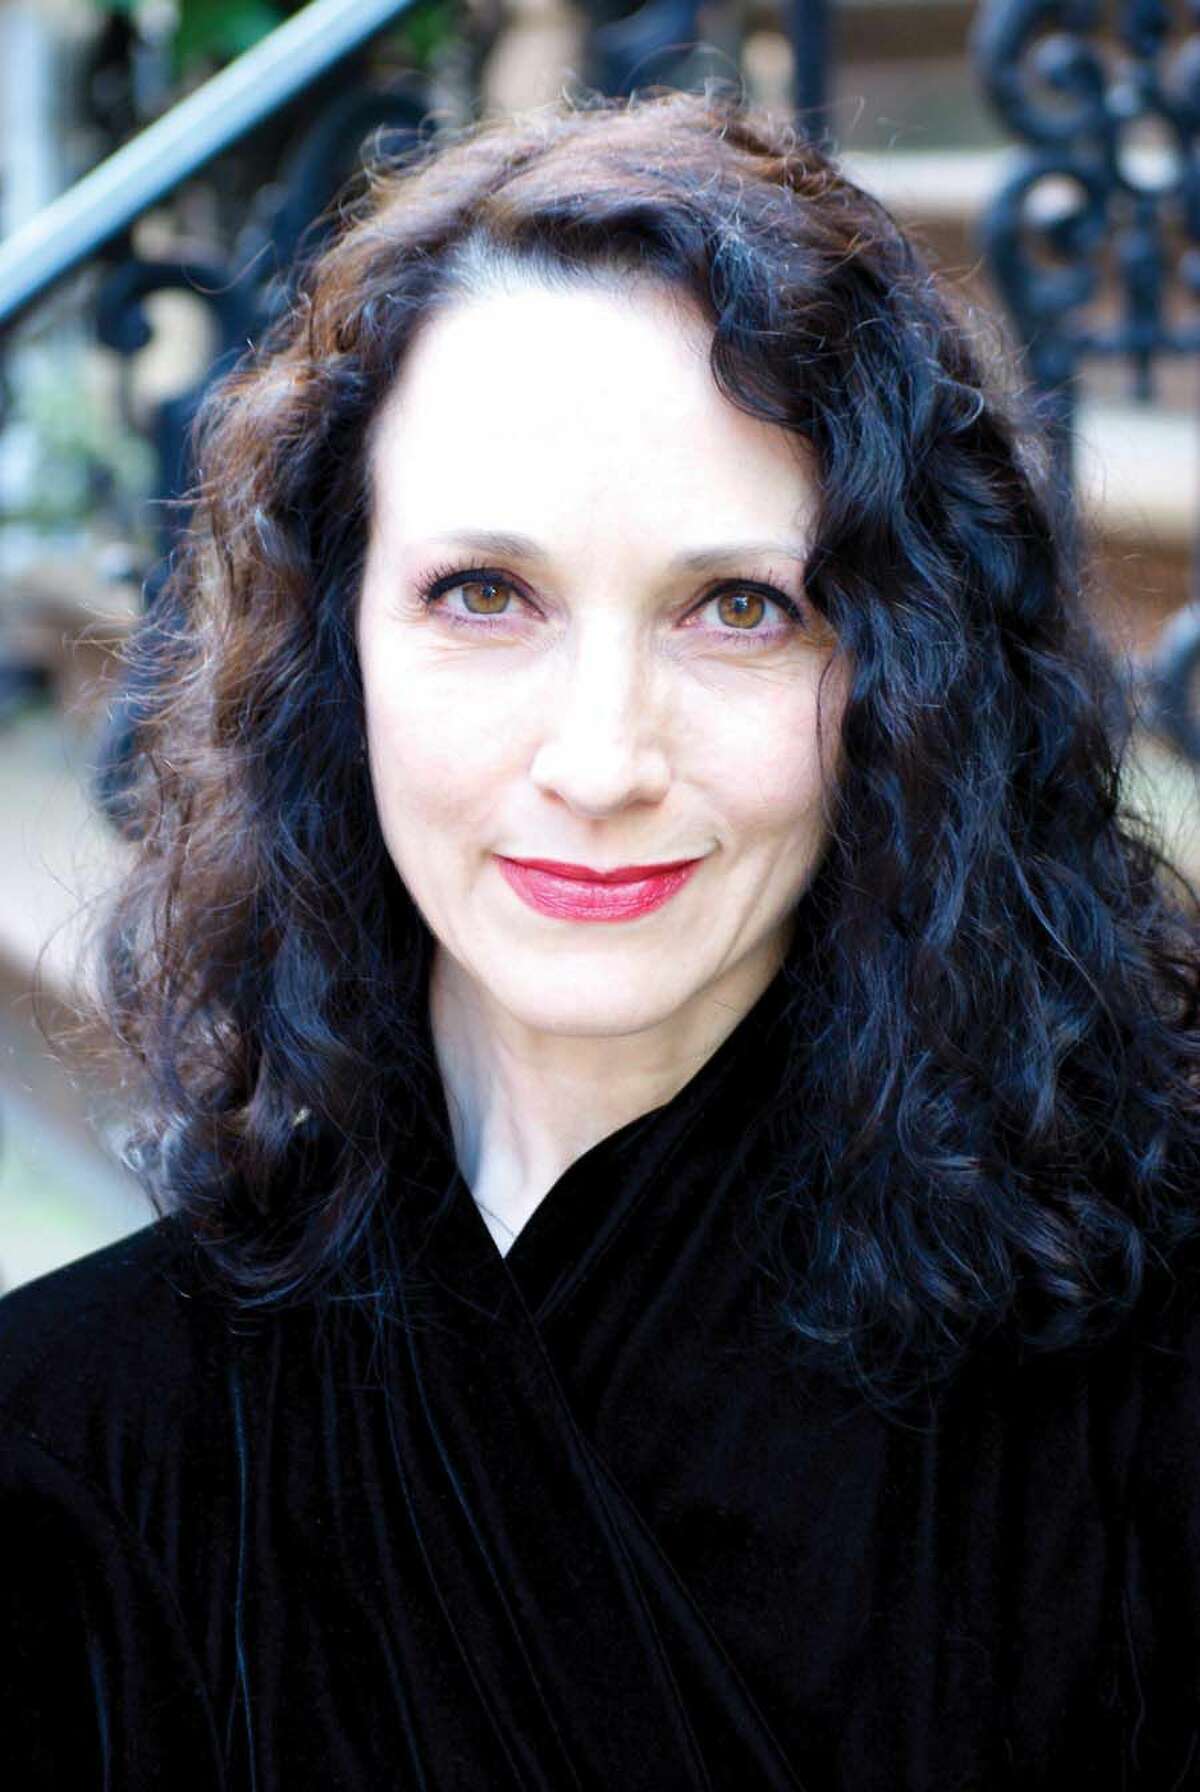 Bebe Neuwirth has a musical story or two to tell at the Ridgefield Playhouse on Nov. 10.